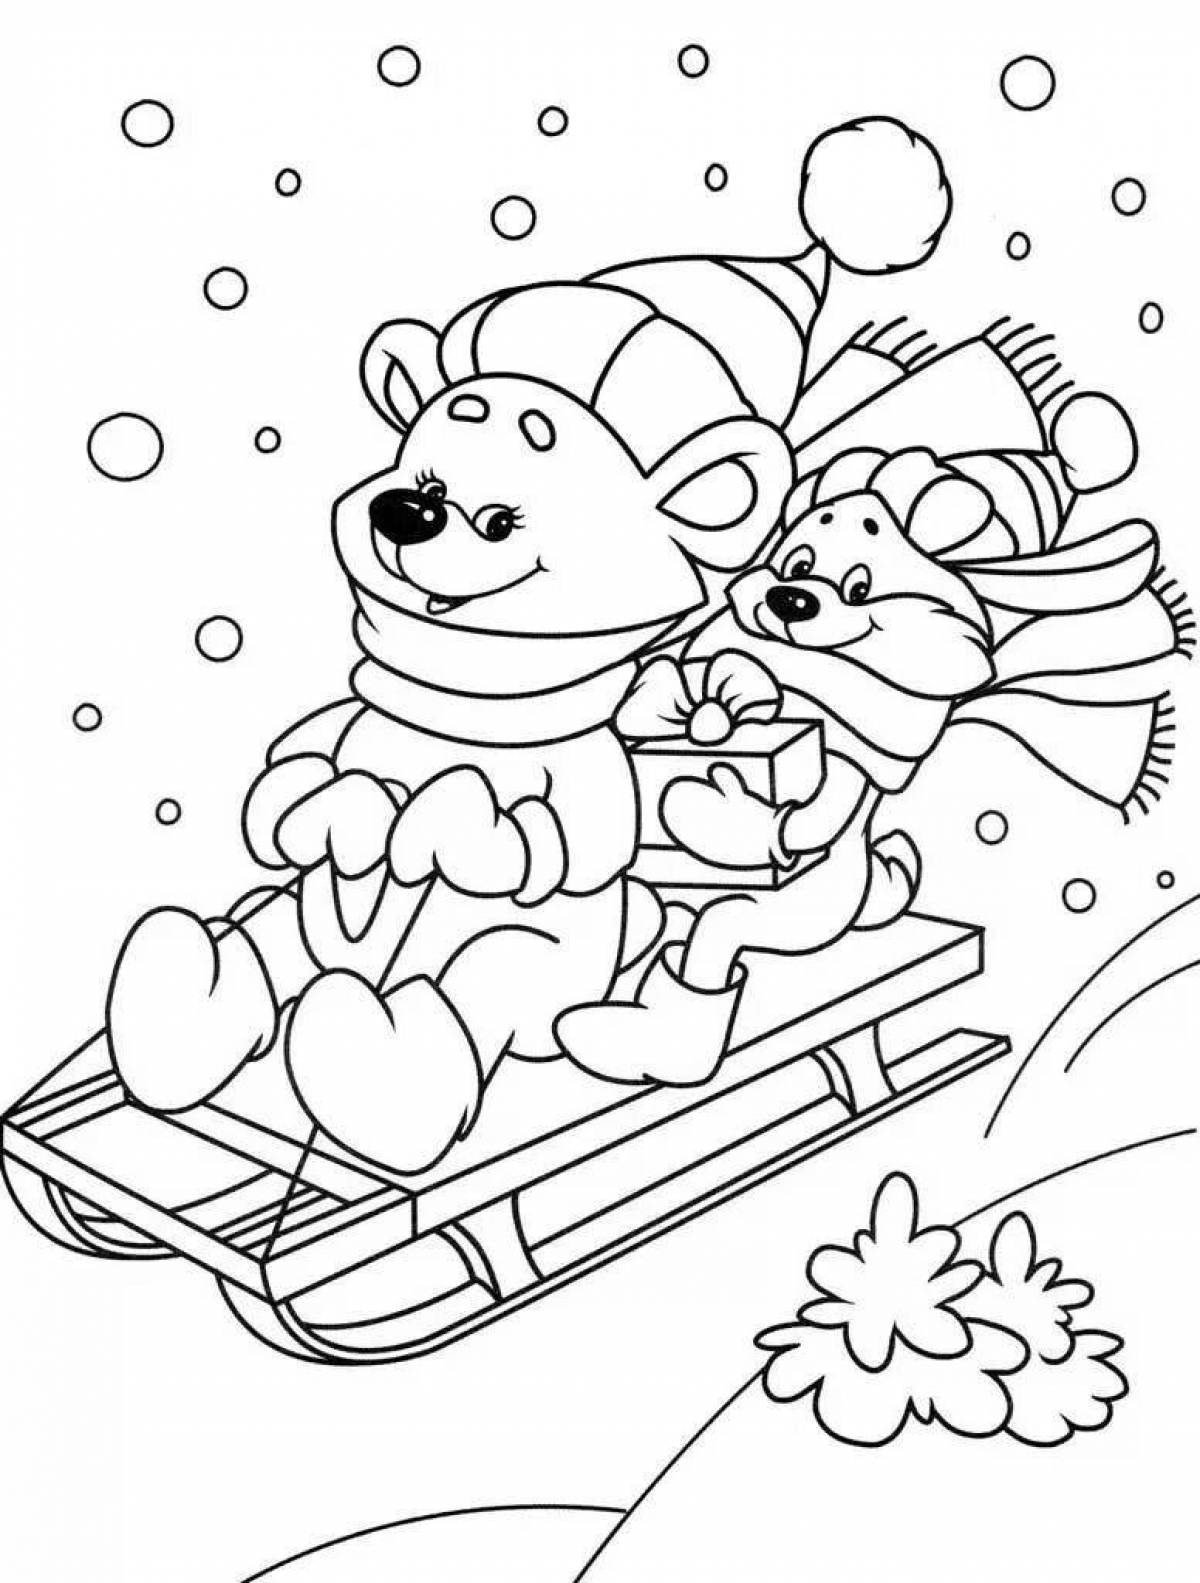 Fabulous sledge coloring book for children 4-5 years old